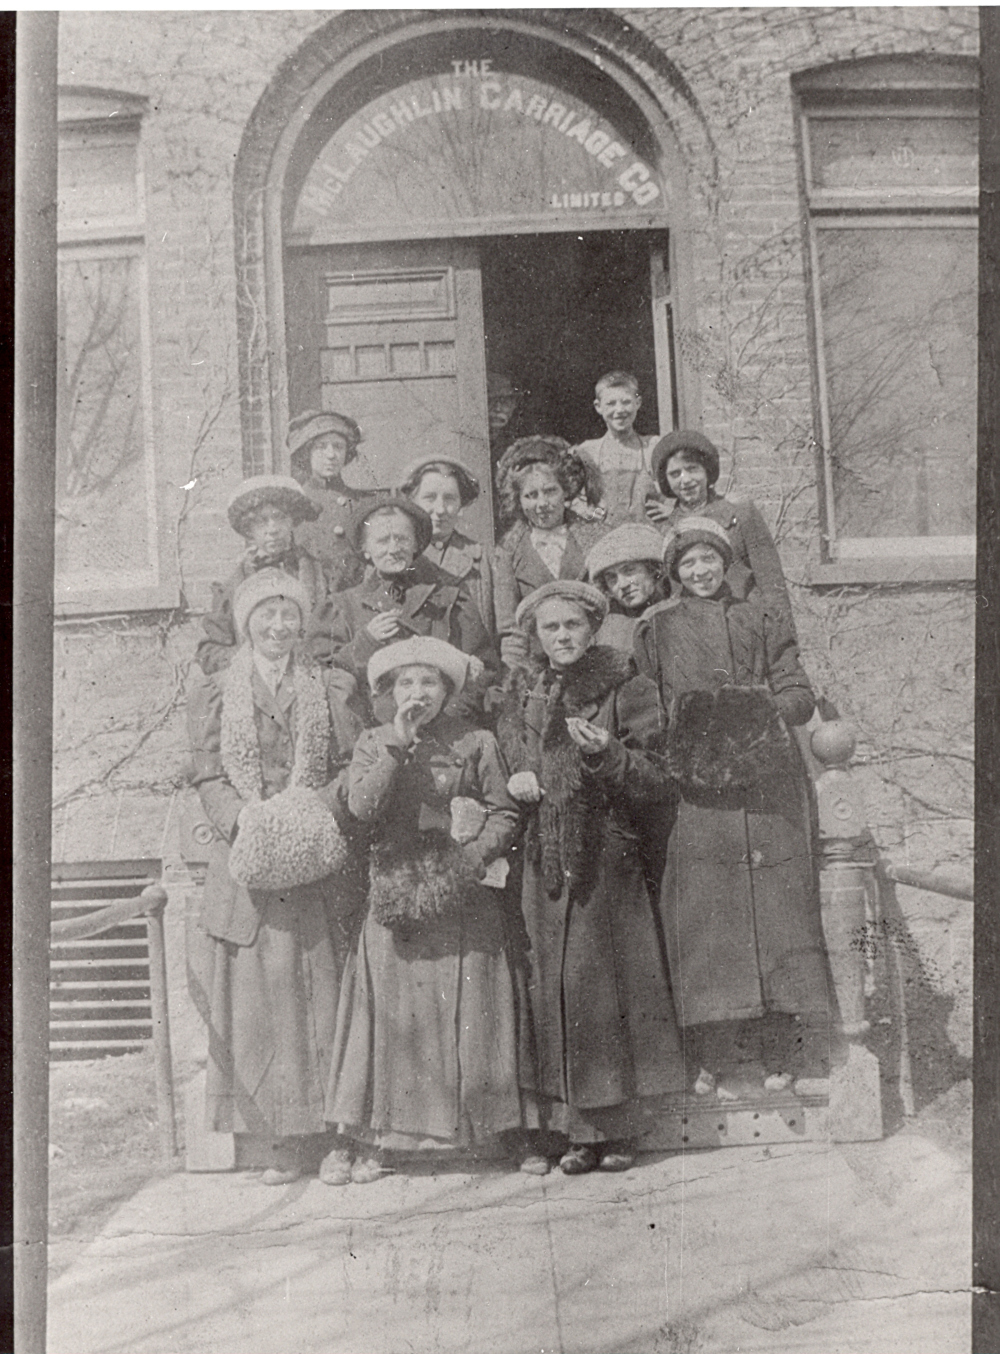 Female office workers in 1900s clothing stand on the steps of a brick building with "The McLaughlin Carriage Co Limited" printed above the doorway.